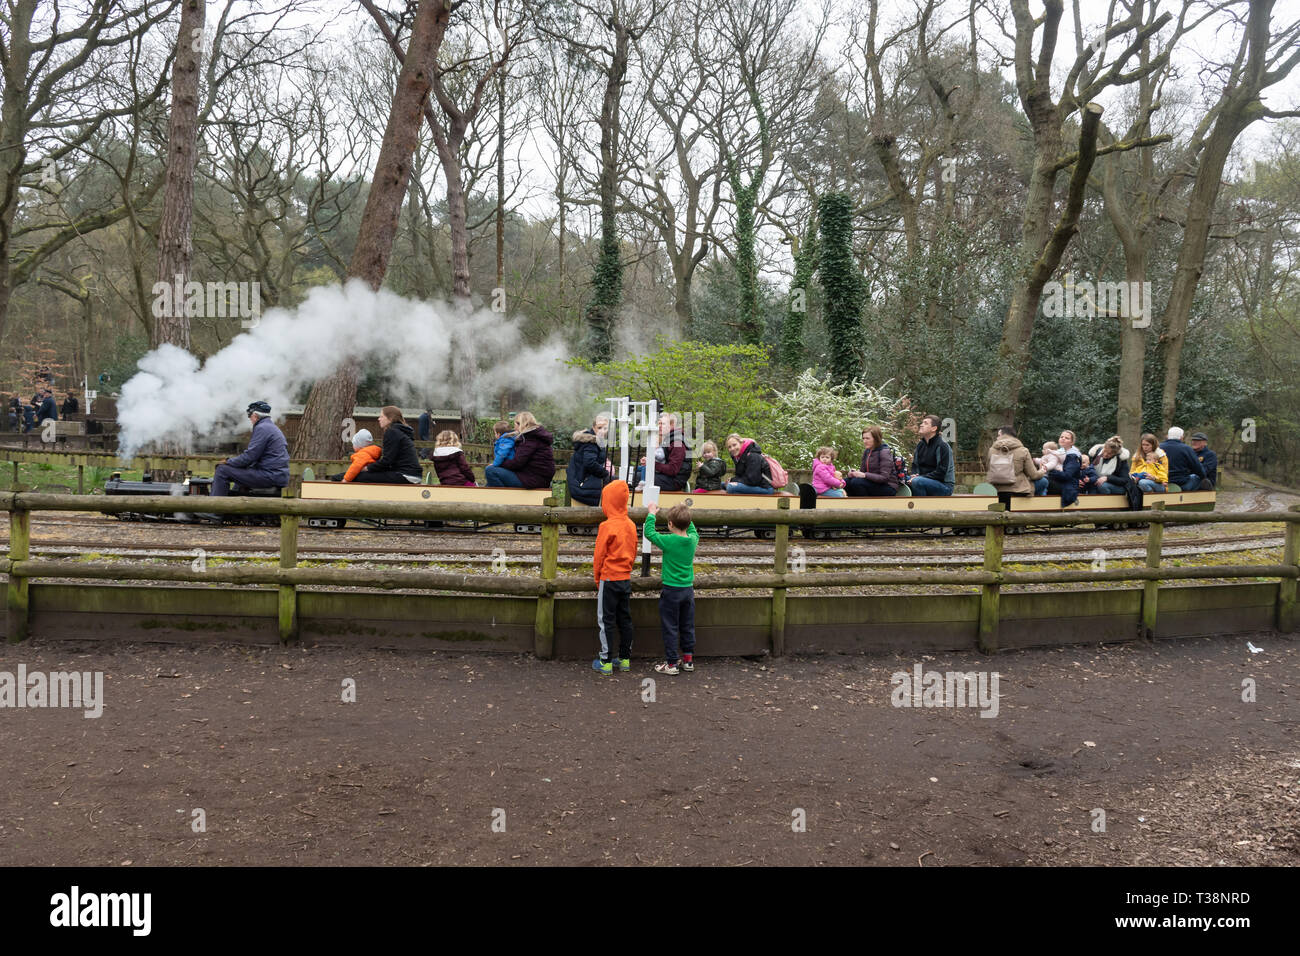 Families enjoying rides on the miniature steam trains and railway at Frimley Lodge Park, Frimley, Surrey, UK Stock Photo